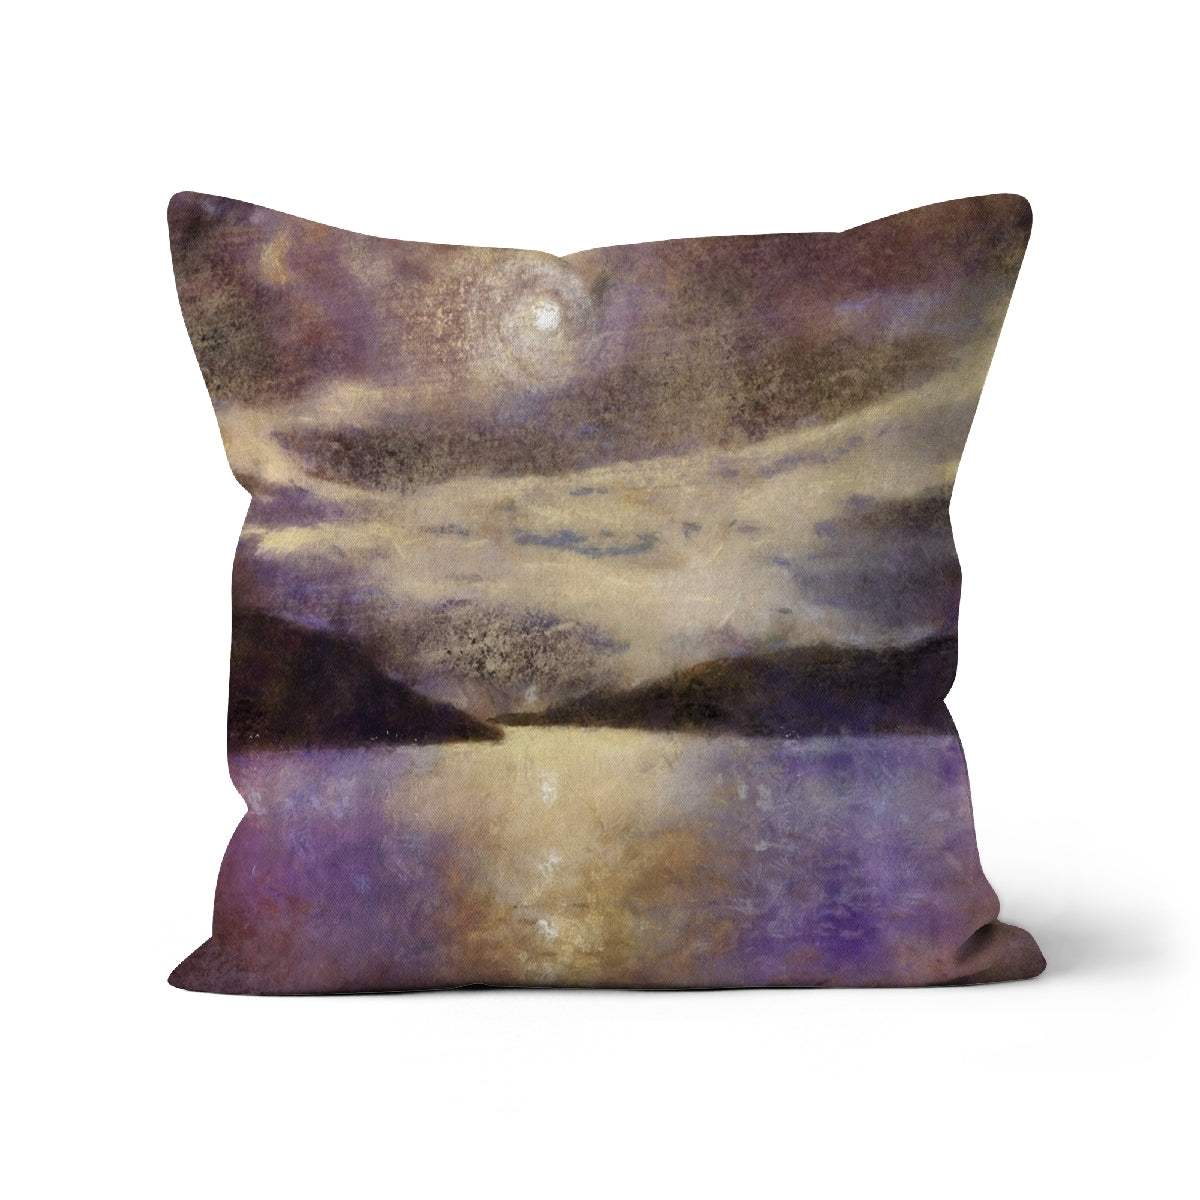 Moonlight Meets Lewis & Harris Art Gifts Cushion-Cushions-Hebridean Islands Art Gallery-Faux Suede-18"x18"-Paintings, Prints, Homeware, Art Gifts From Scotland By Scottish Artist Kevin Hunter